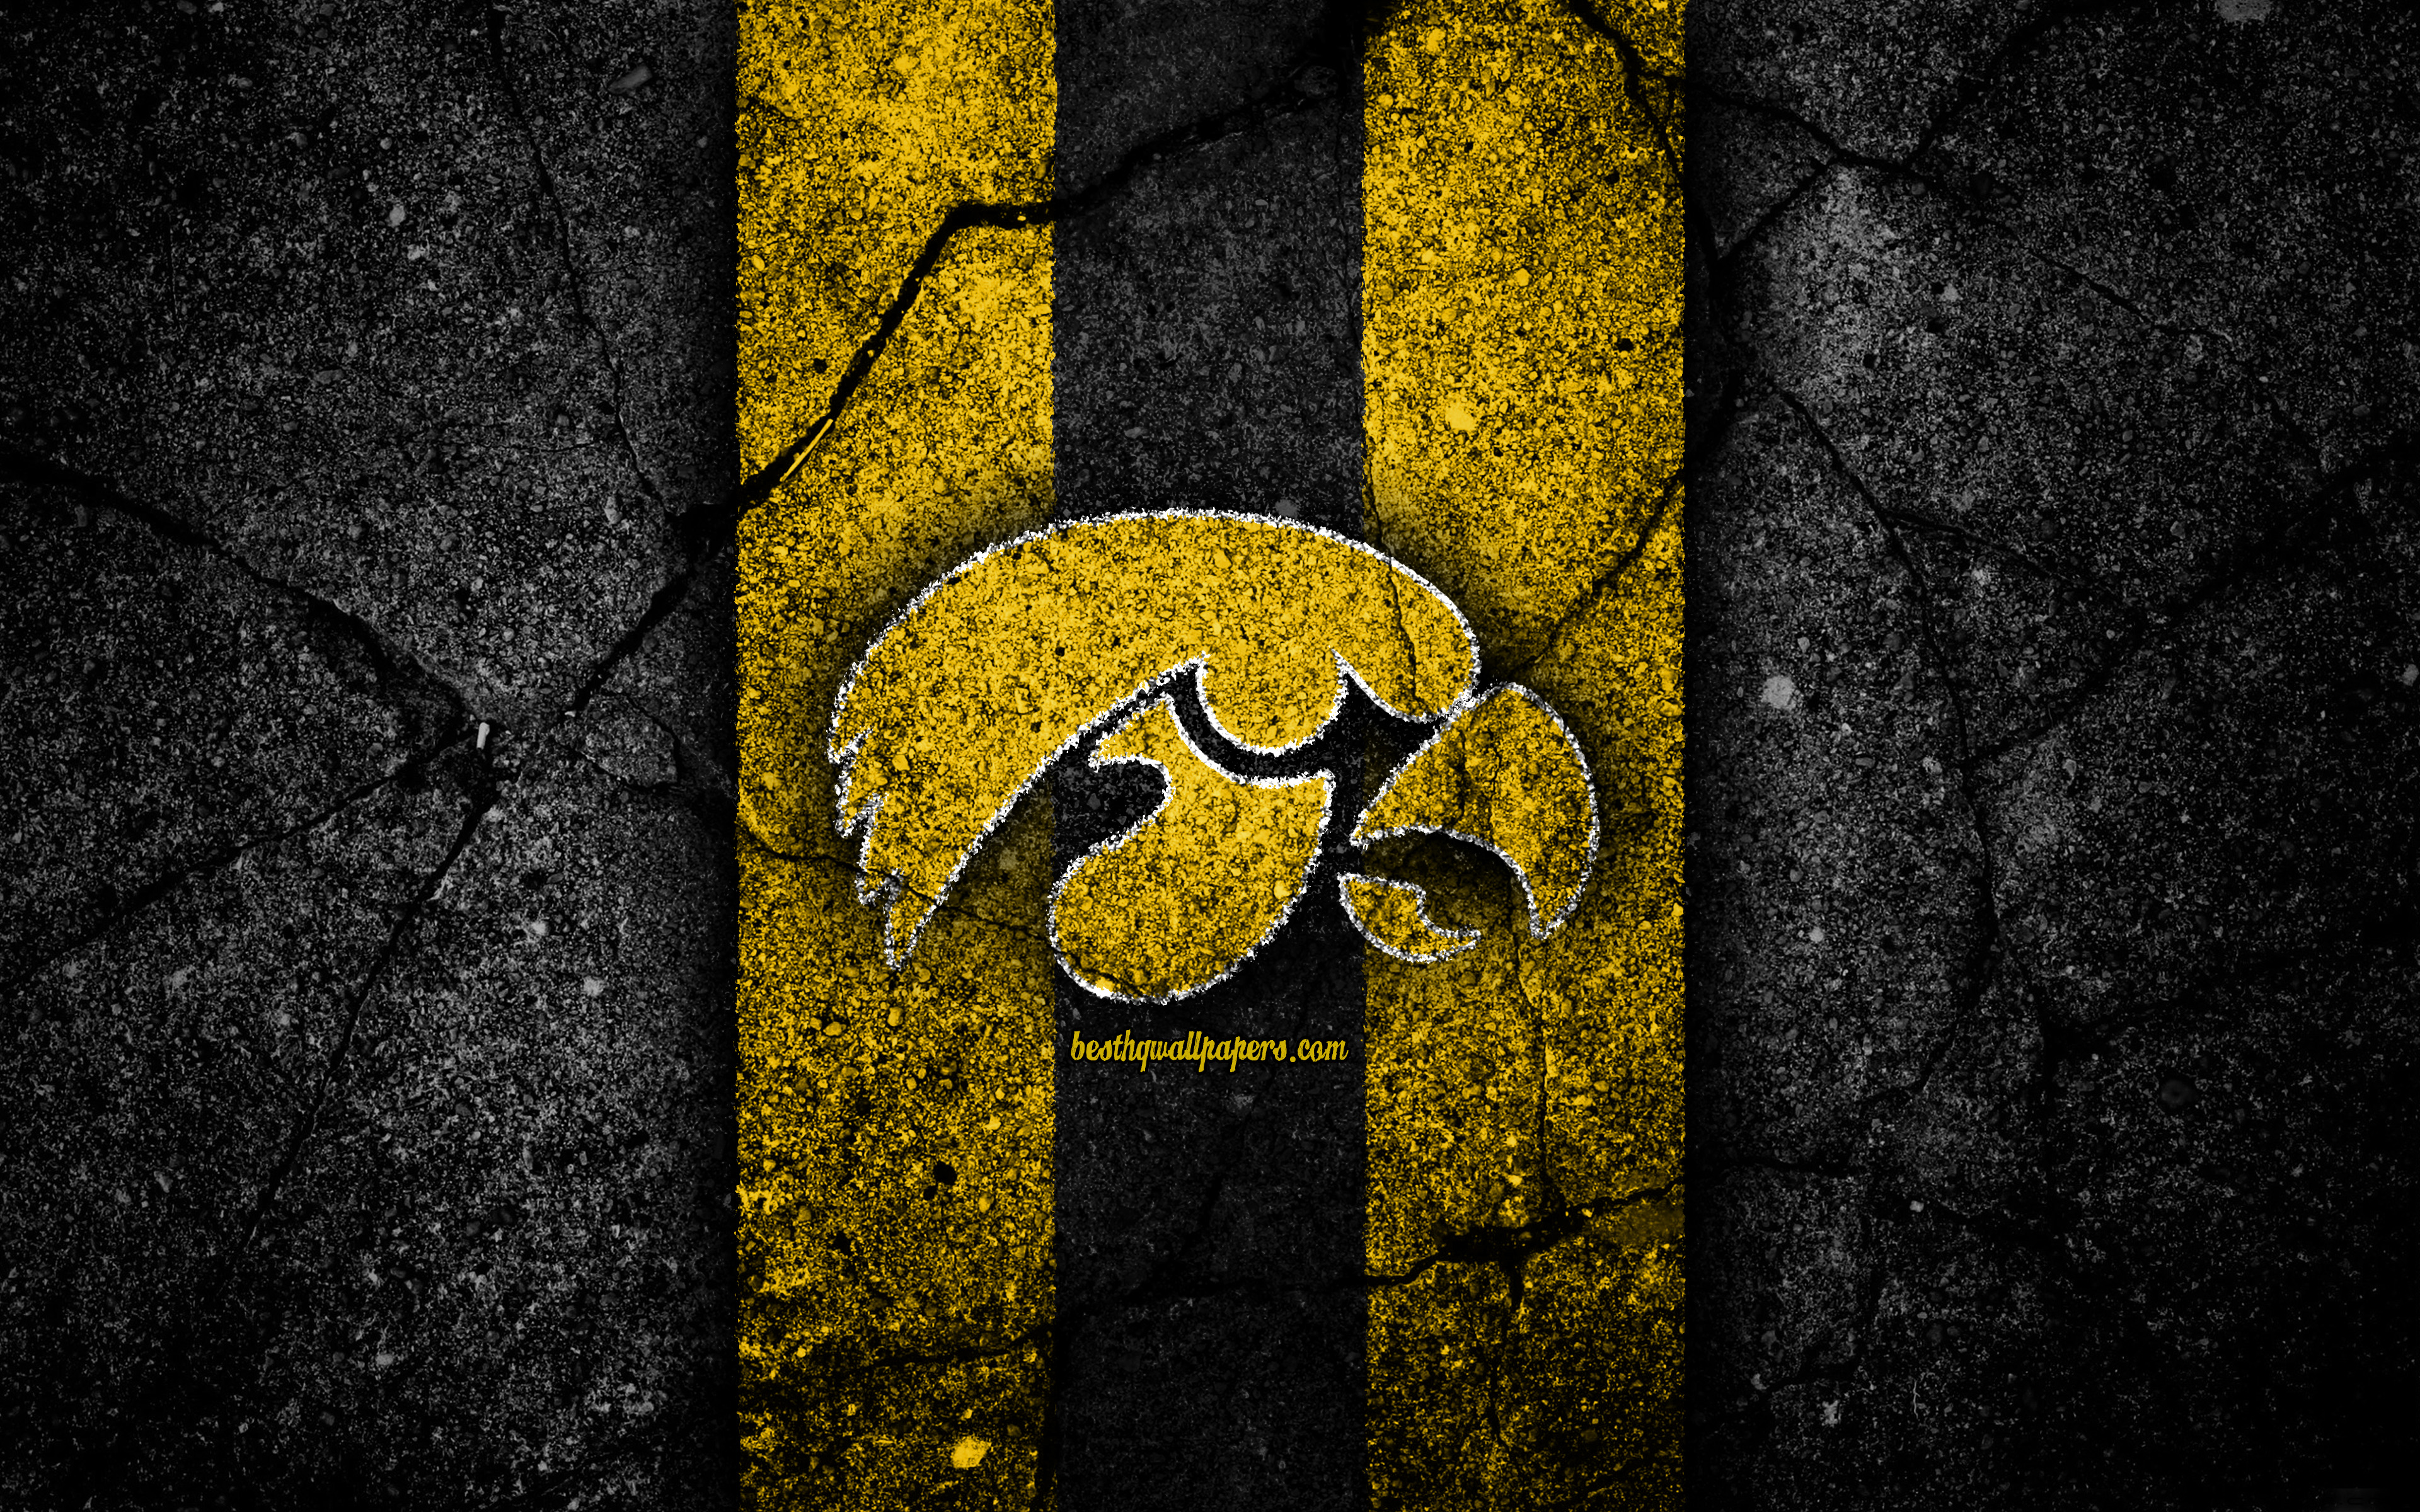 Download wallpaper Iowa Hawkeyes, 4k, american football team, NCAA, yellow black stone, USA, asphalt texture, american football, Iowa Hawkeyes logo for desktop with resolution 3840x2400. High Quality HD picture wallpaper